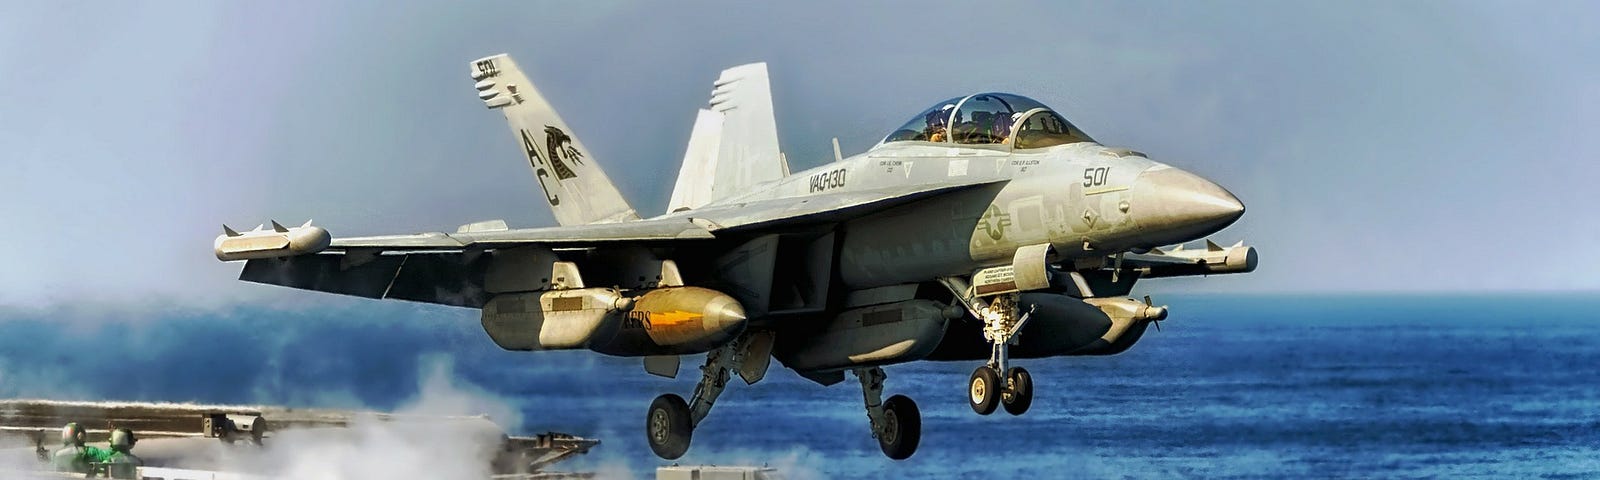 A Navy fighter jet taking off from an aircraft carrier